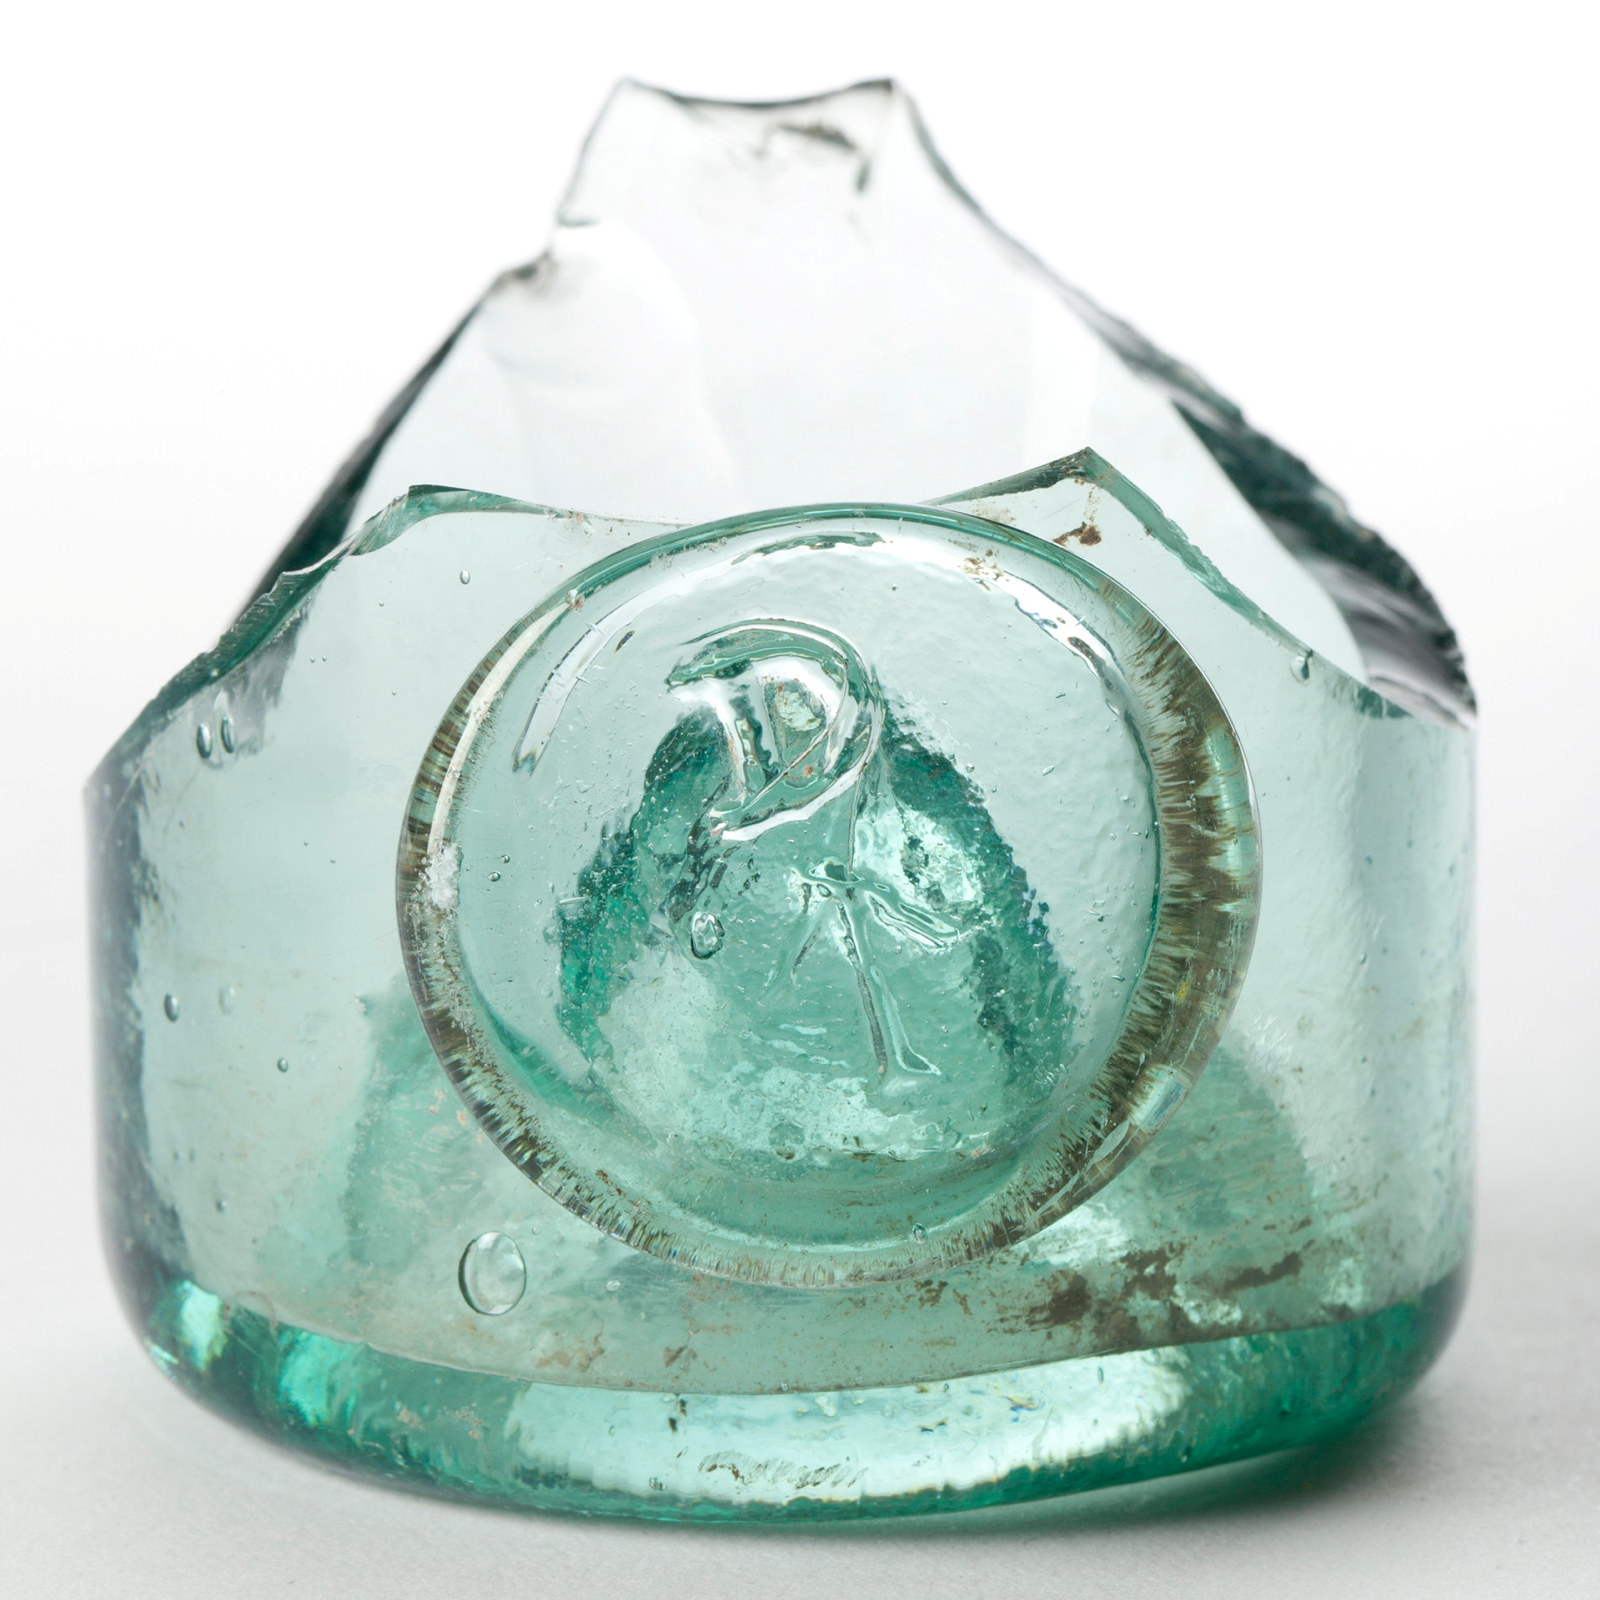 Fragment of heavy bottomed glass bottle with arrow mark.